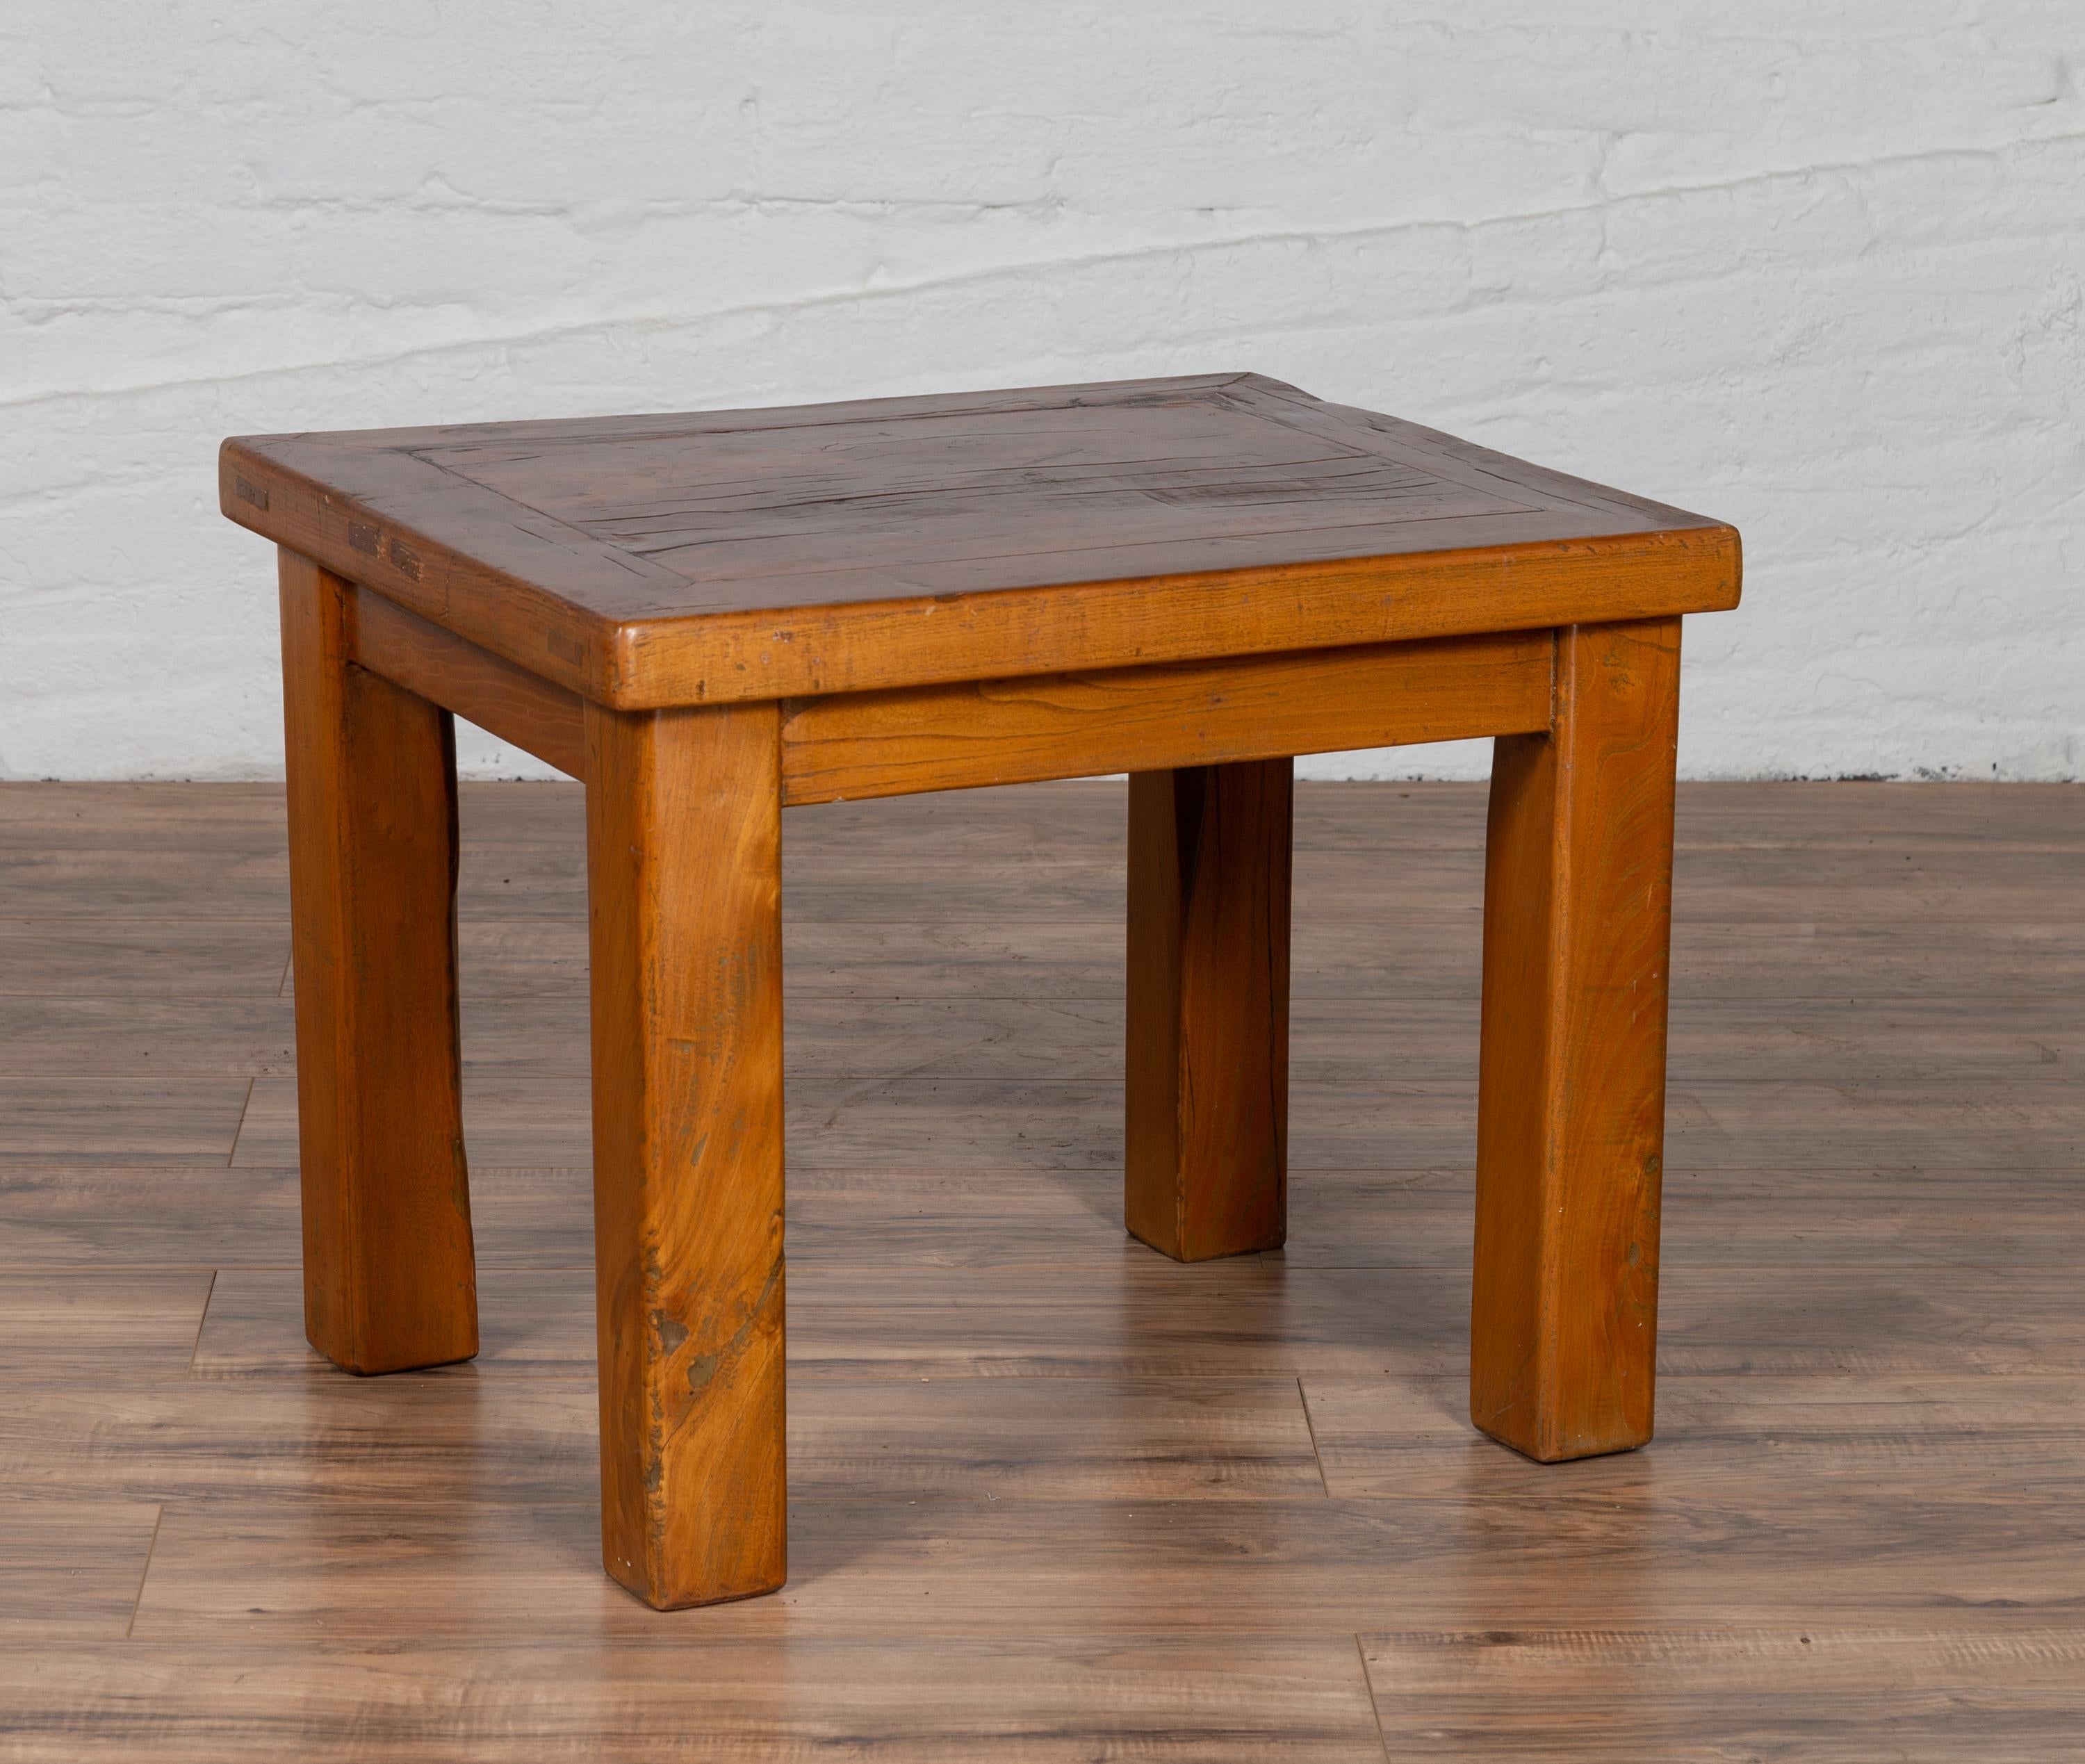 A Chinese vintage natural wood side table from the mid-20th century with square legs and contemporary design. Born in China during the midcentury period, this elegant side table features a rectangular top with central board, sitting above a linear